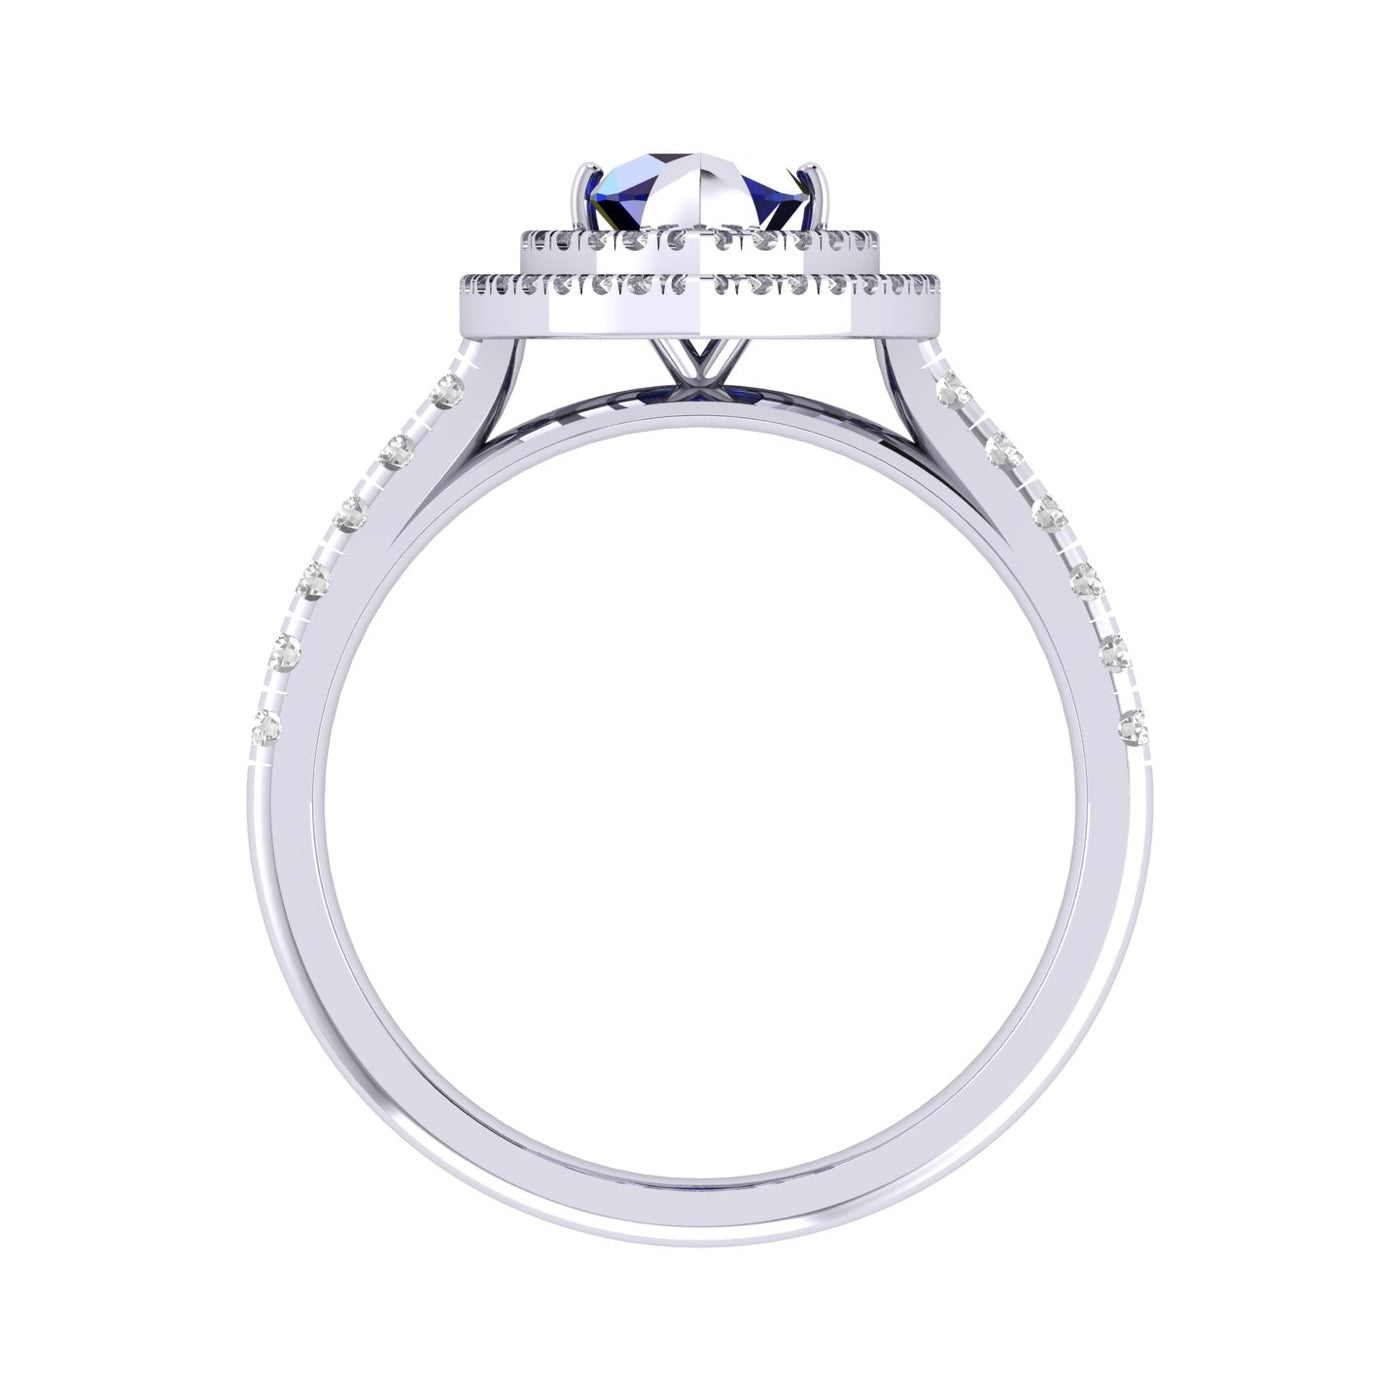 Special Offer ! 1.75Ct Tanzanite & Diamond Double Halo Engagement Ring In Heavy Platinum / 18k White Gold